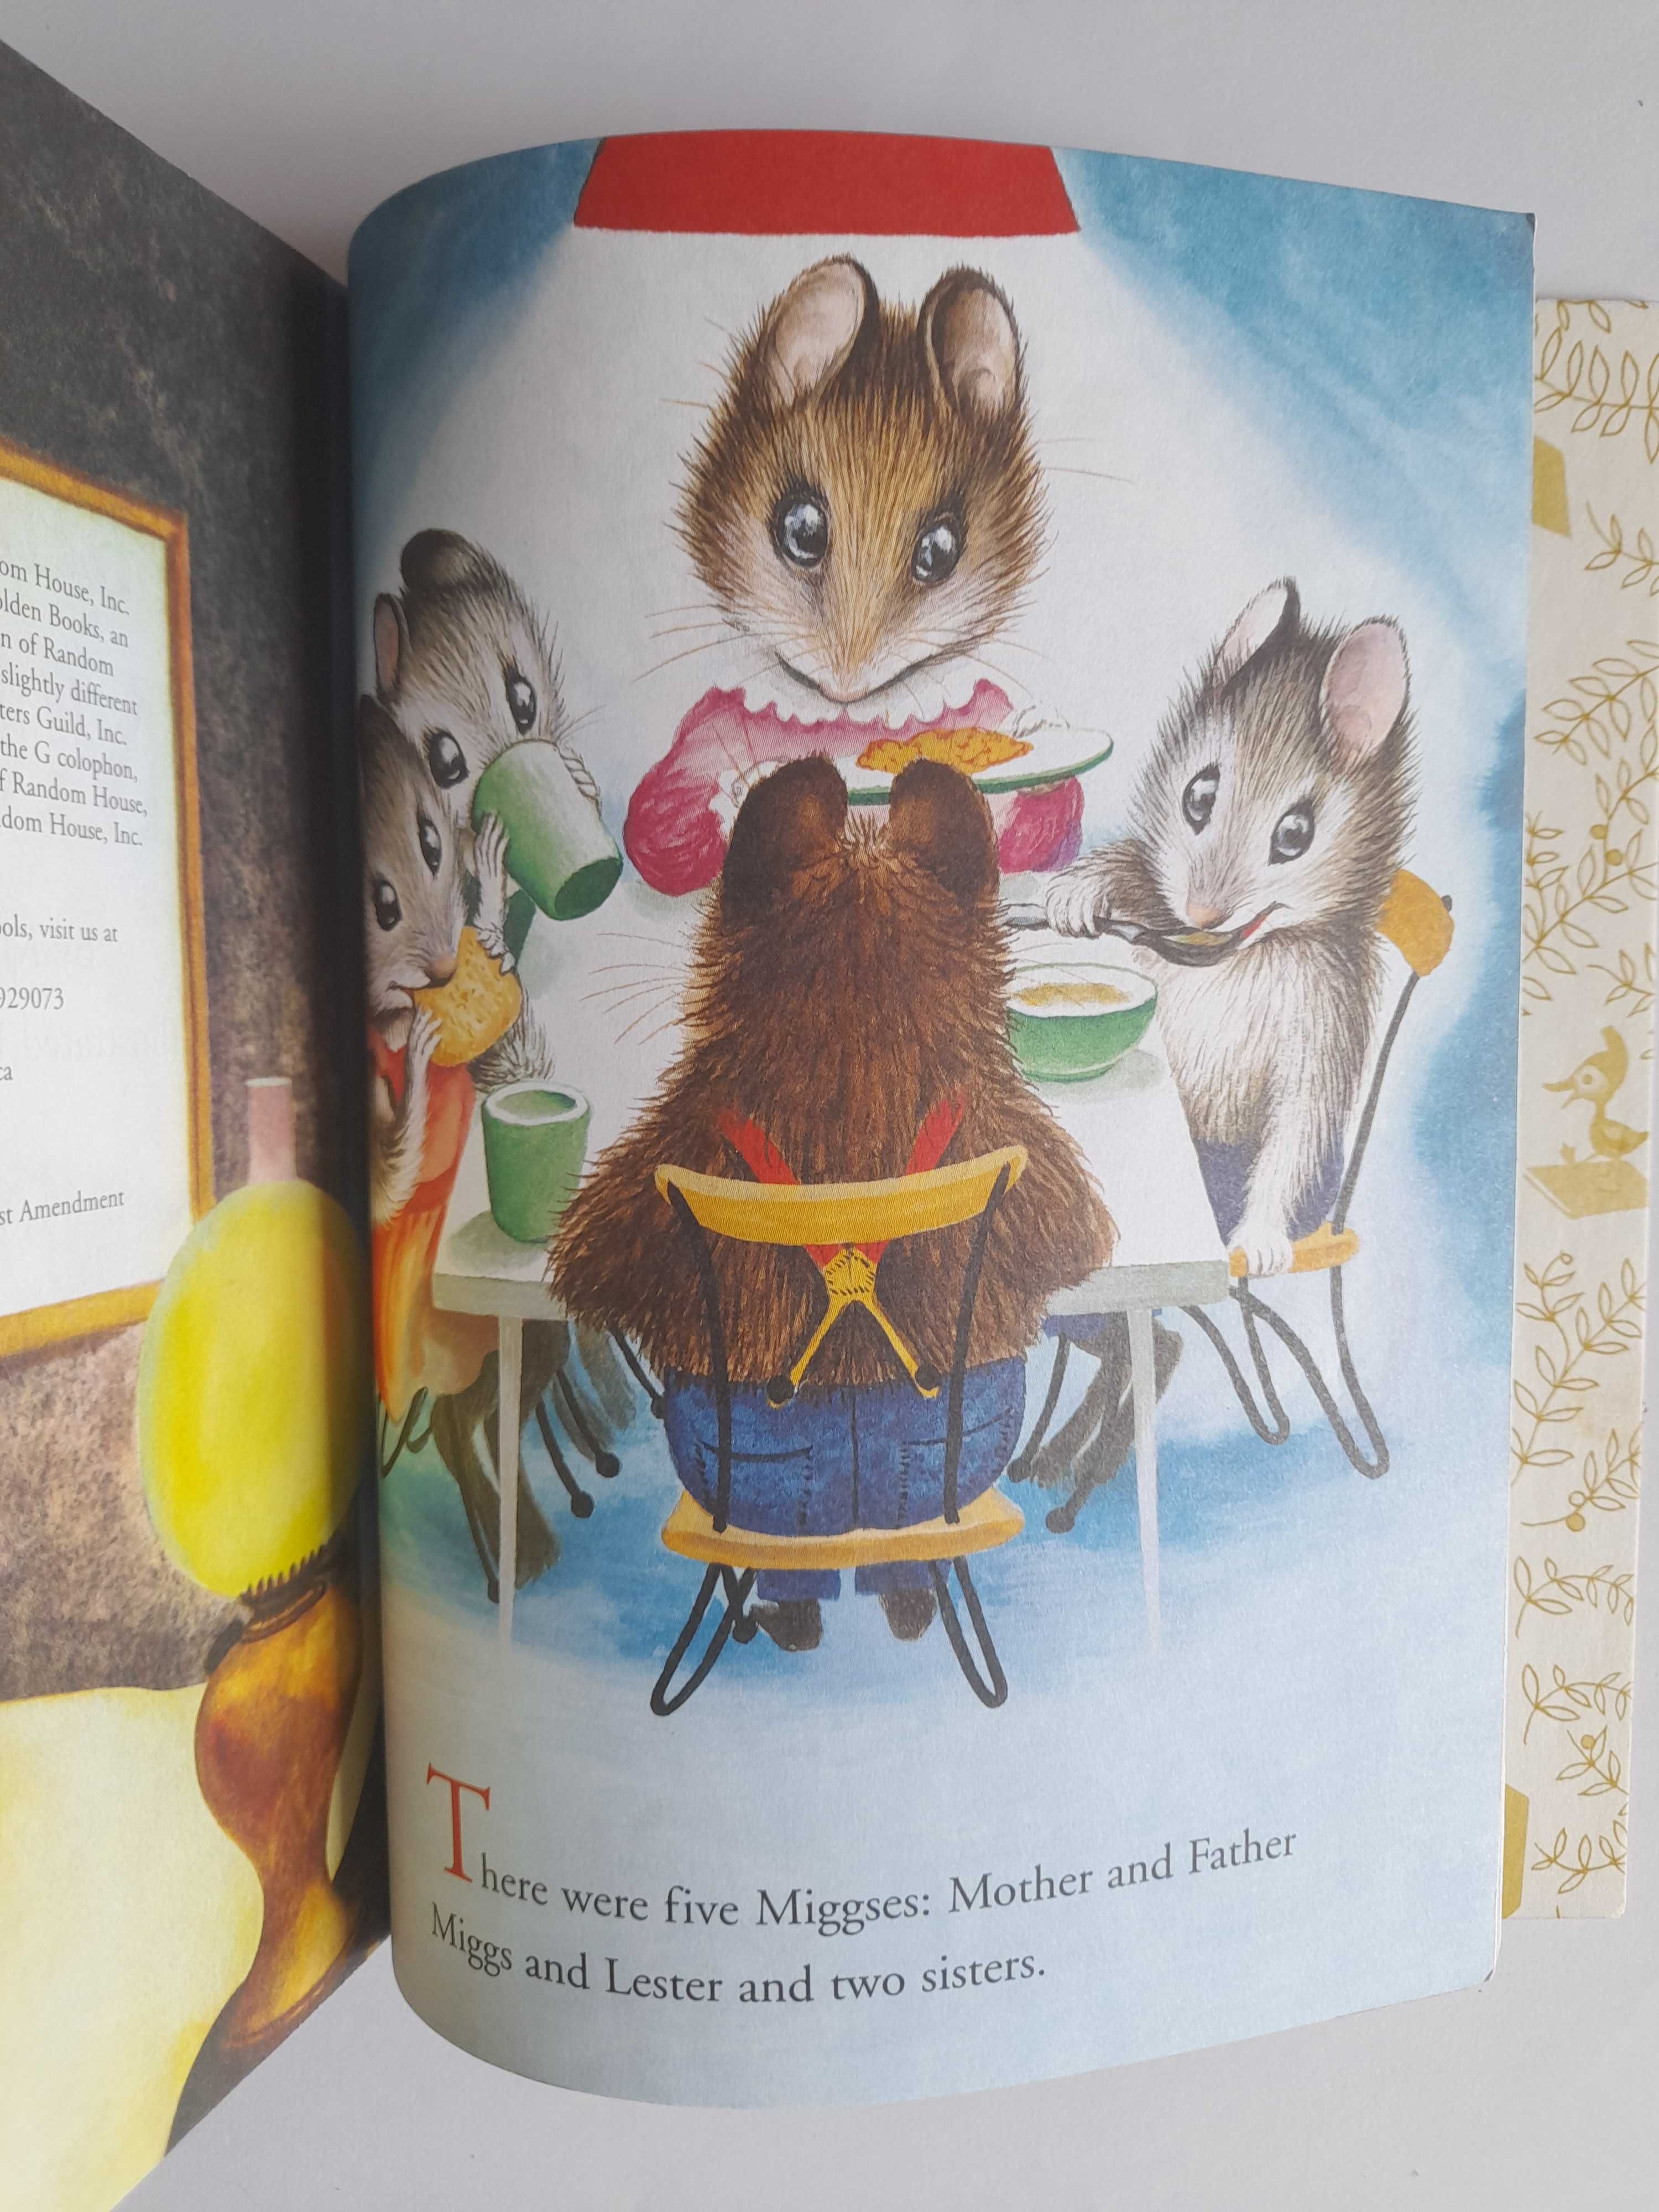 The Kitten Who Thought He Was A Mouse GOLDEN BOOK